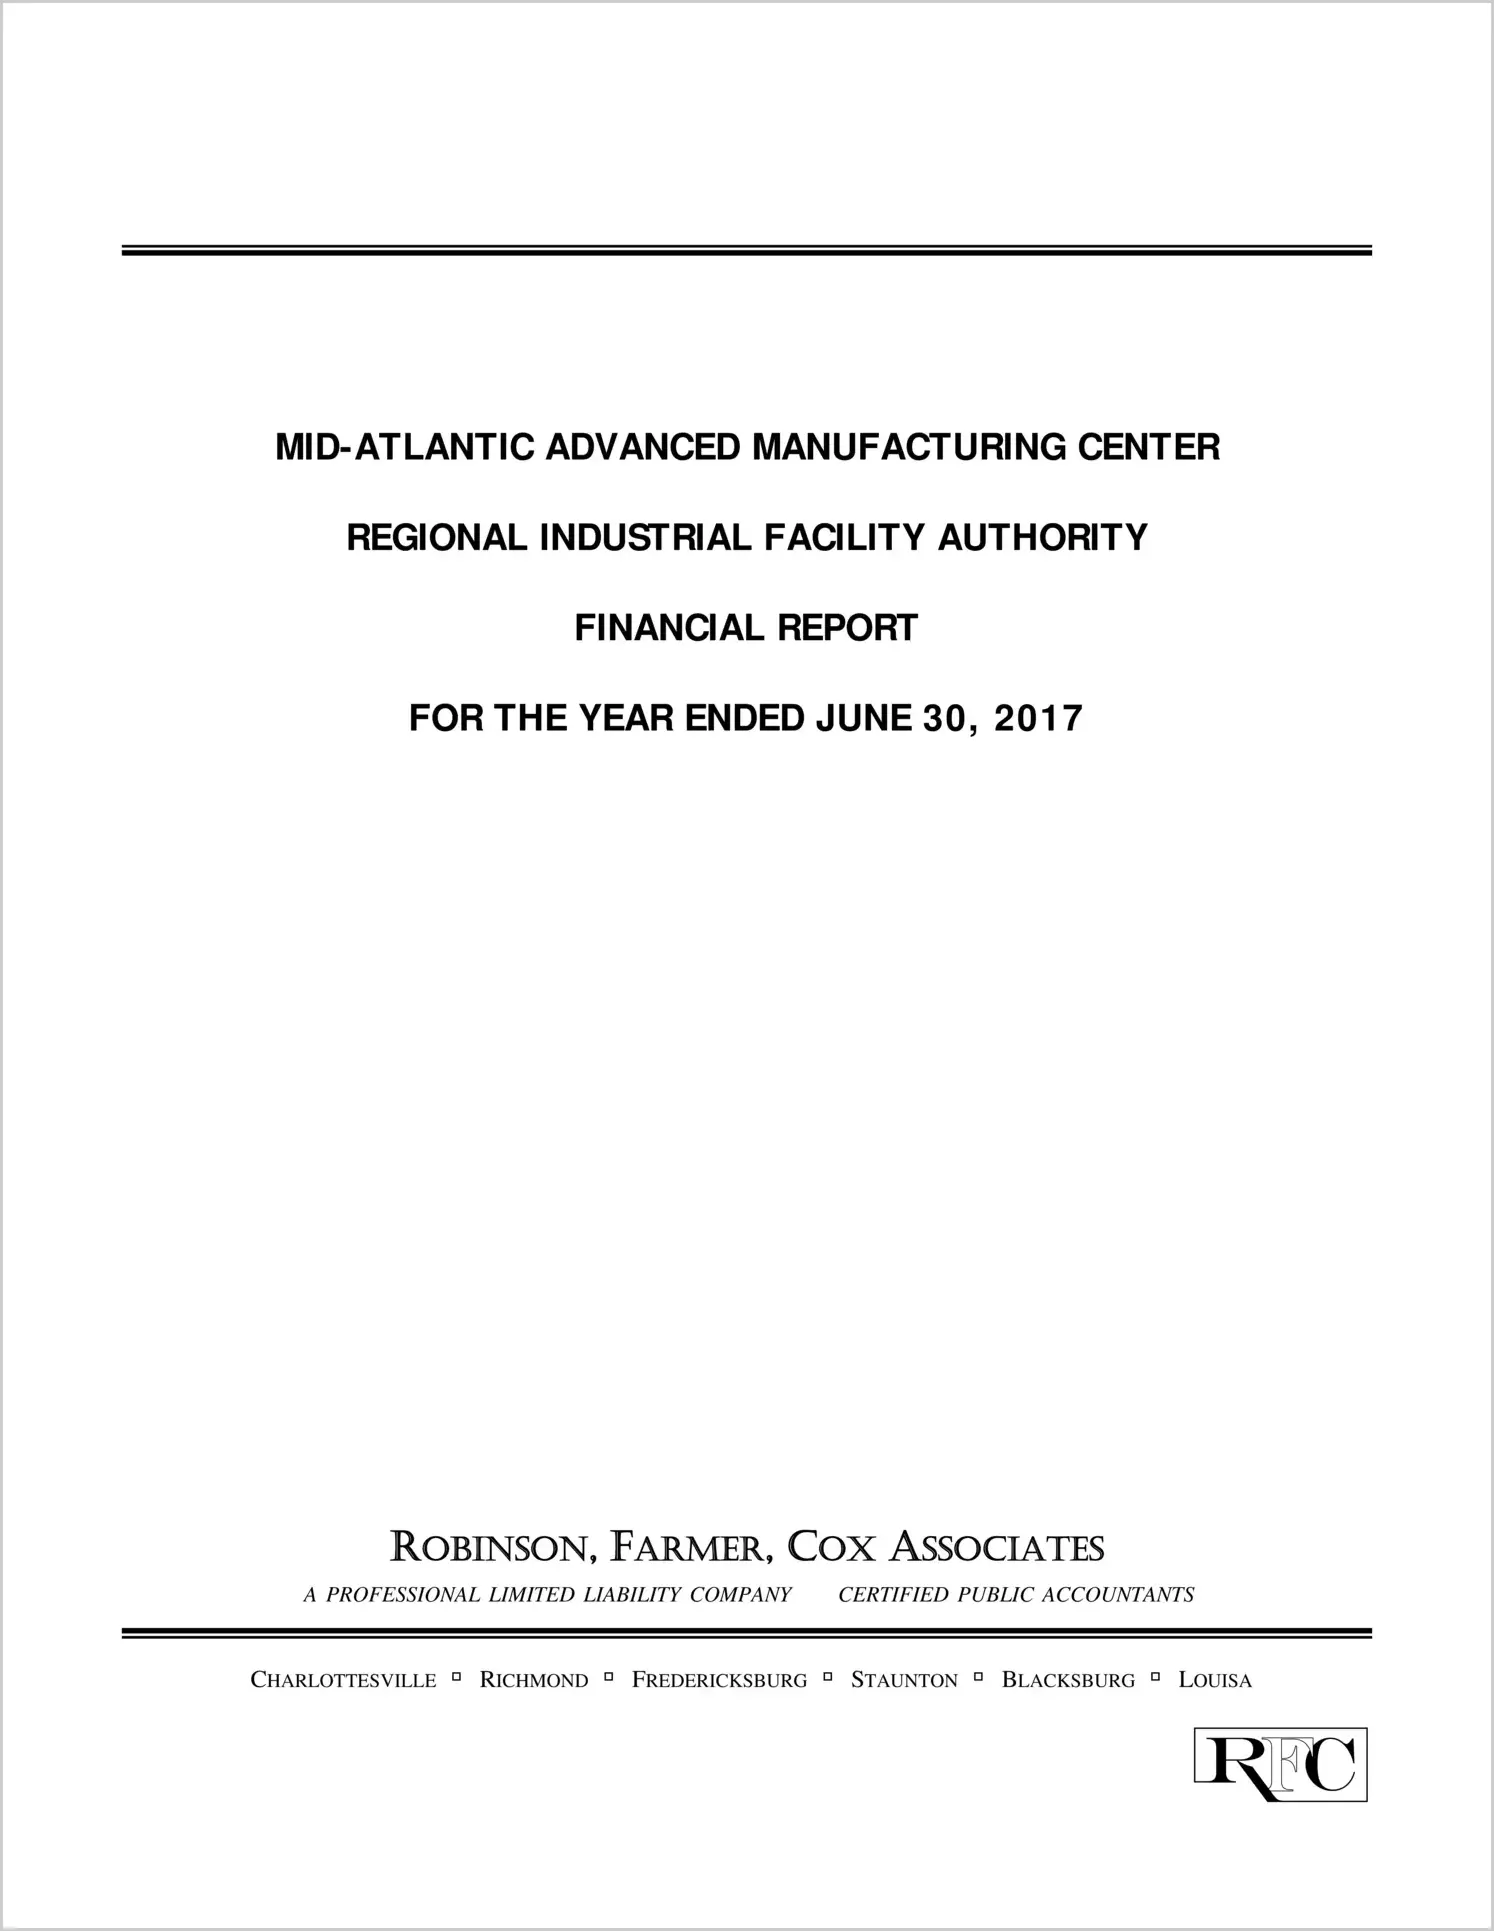 2017 ABC/Other Annual Financial Report  for Mid-Atlantic Advanced Manufacturing Center Regional Industrial Facility Authority